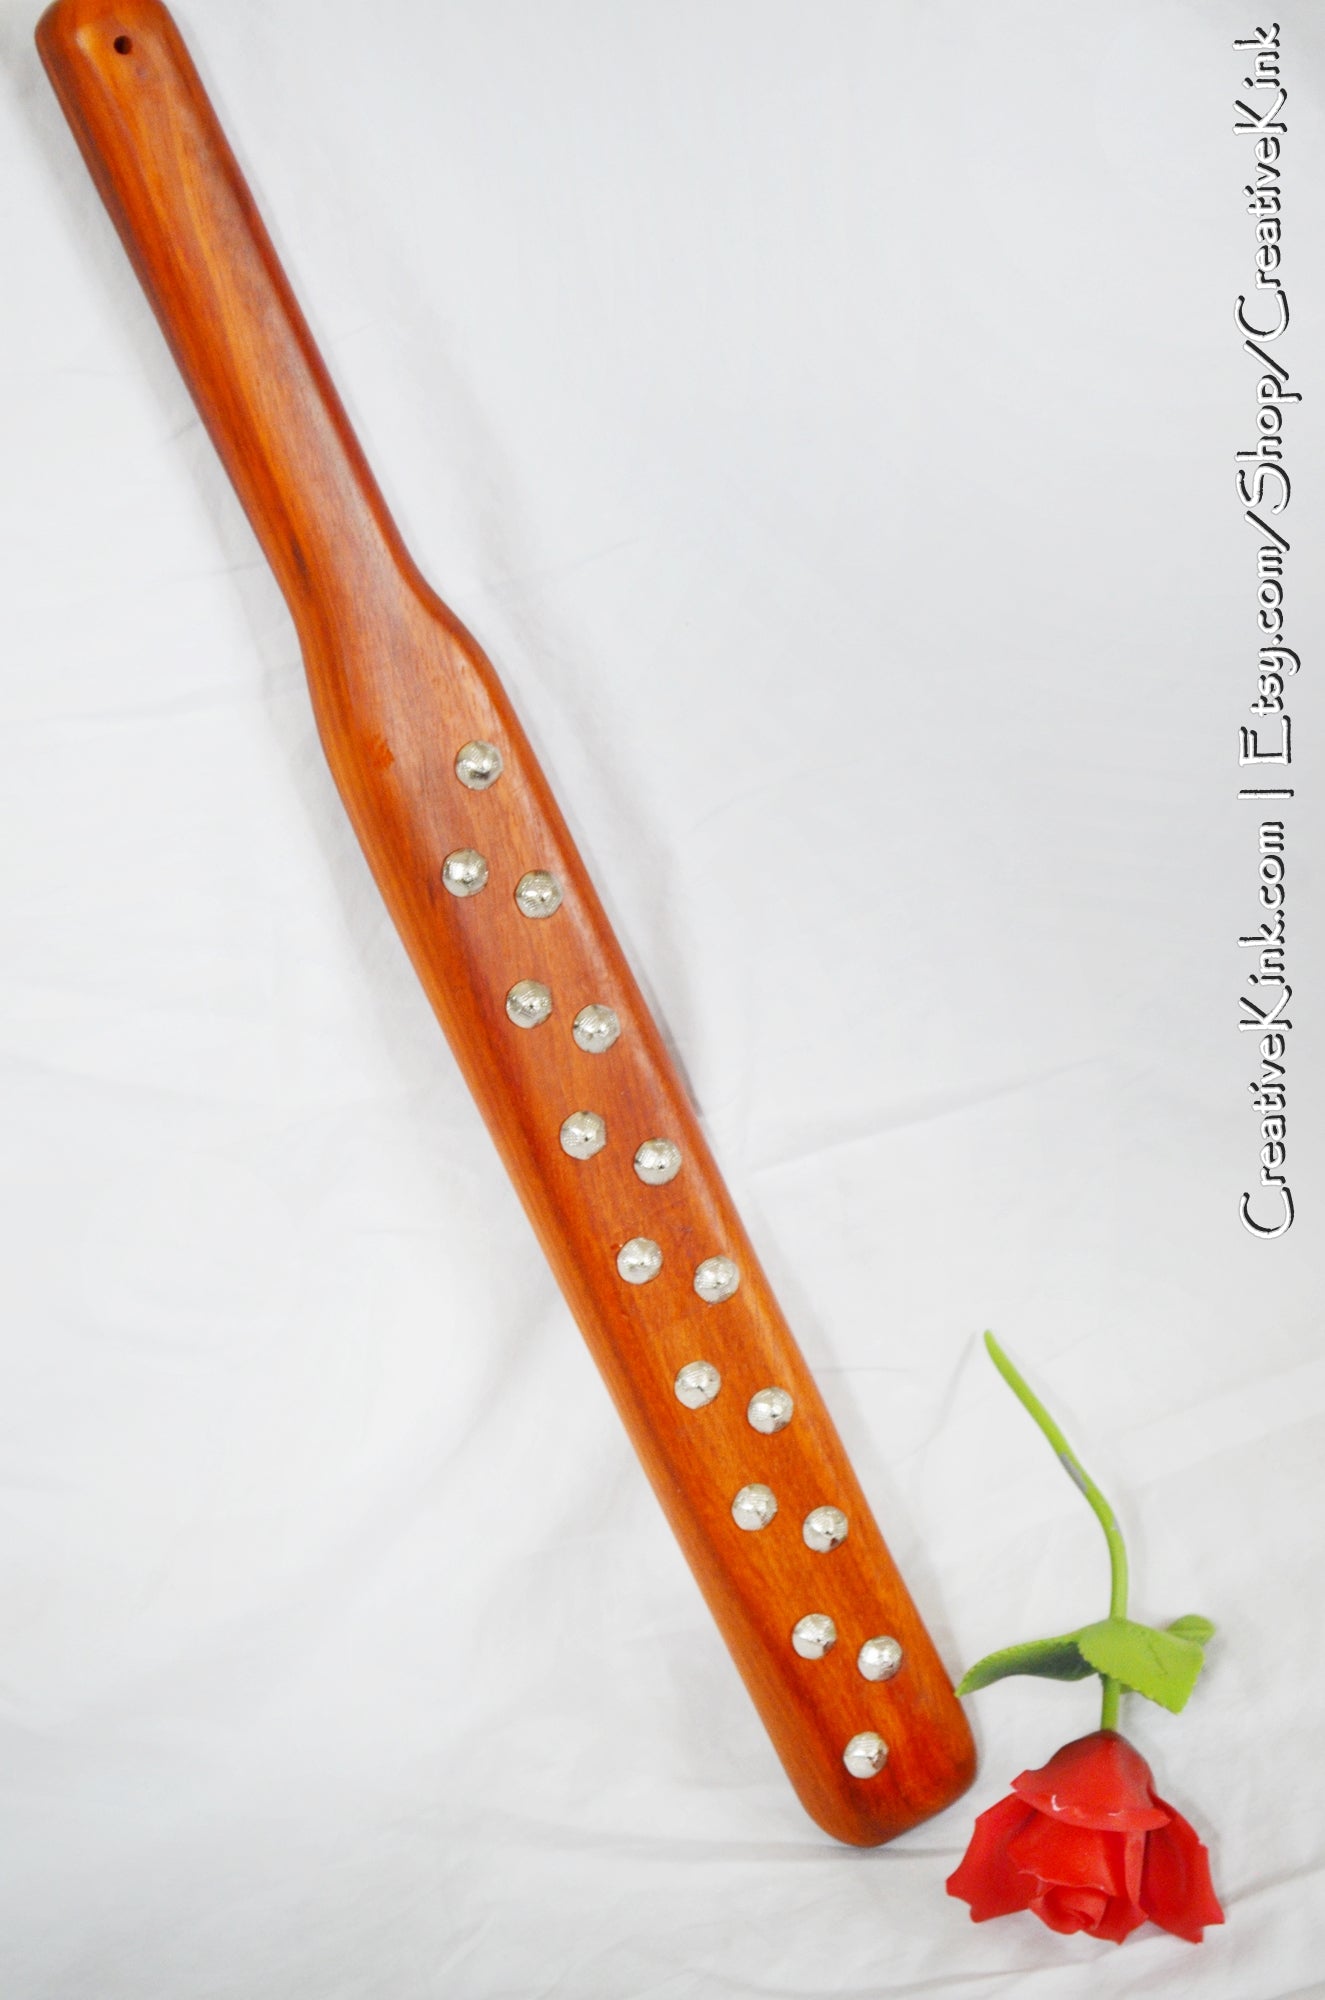 Torquemada Paddle - Rose wood and Silver Spanking Paddle for Thuddy Spankings - BDSM Spanking Tool (Copy)